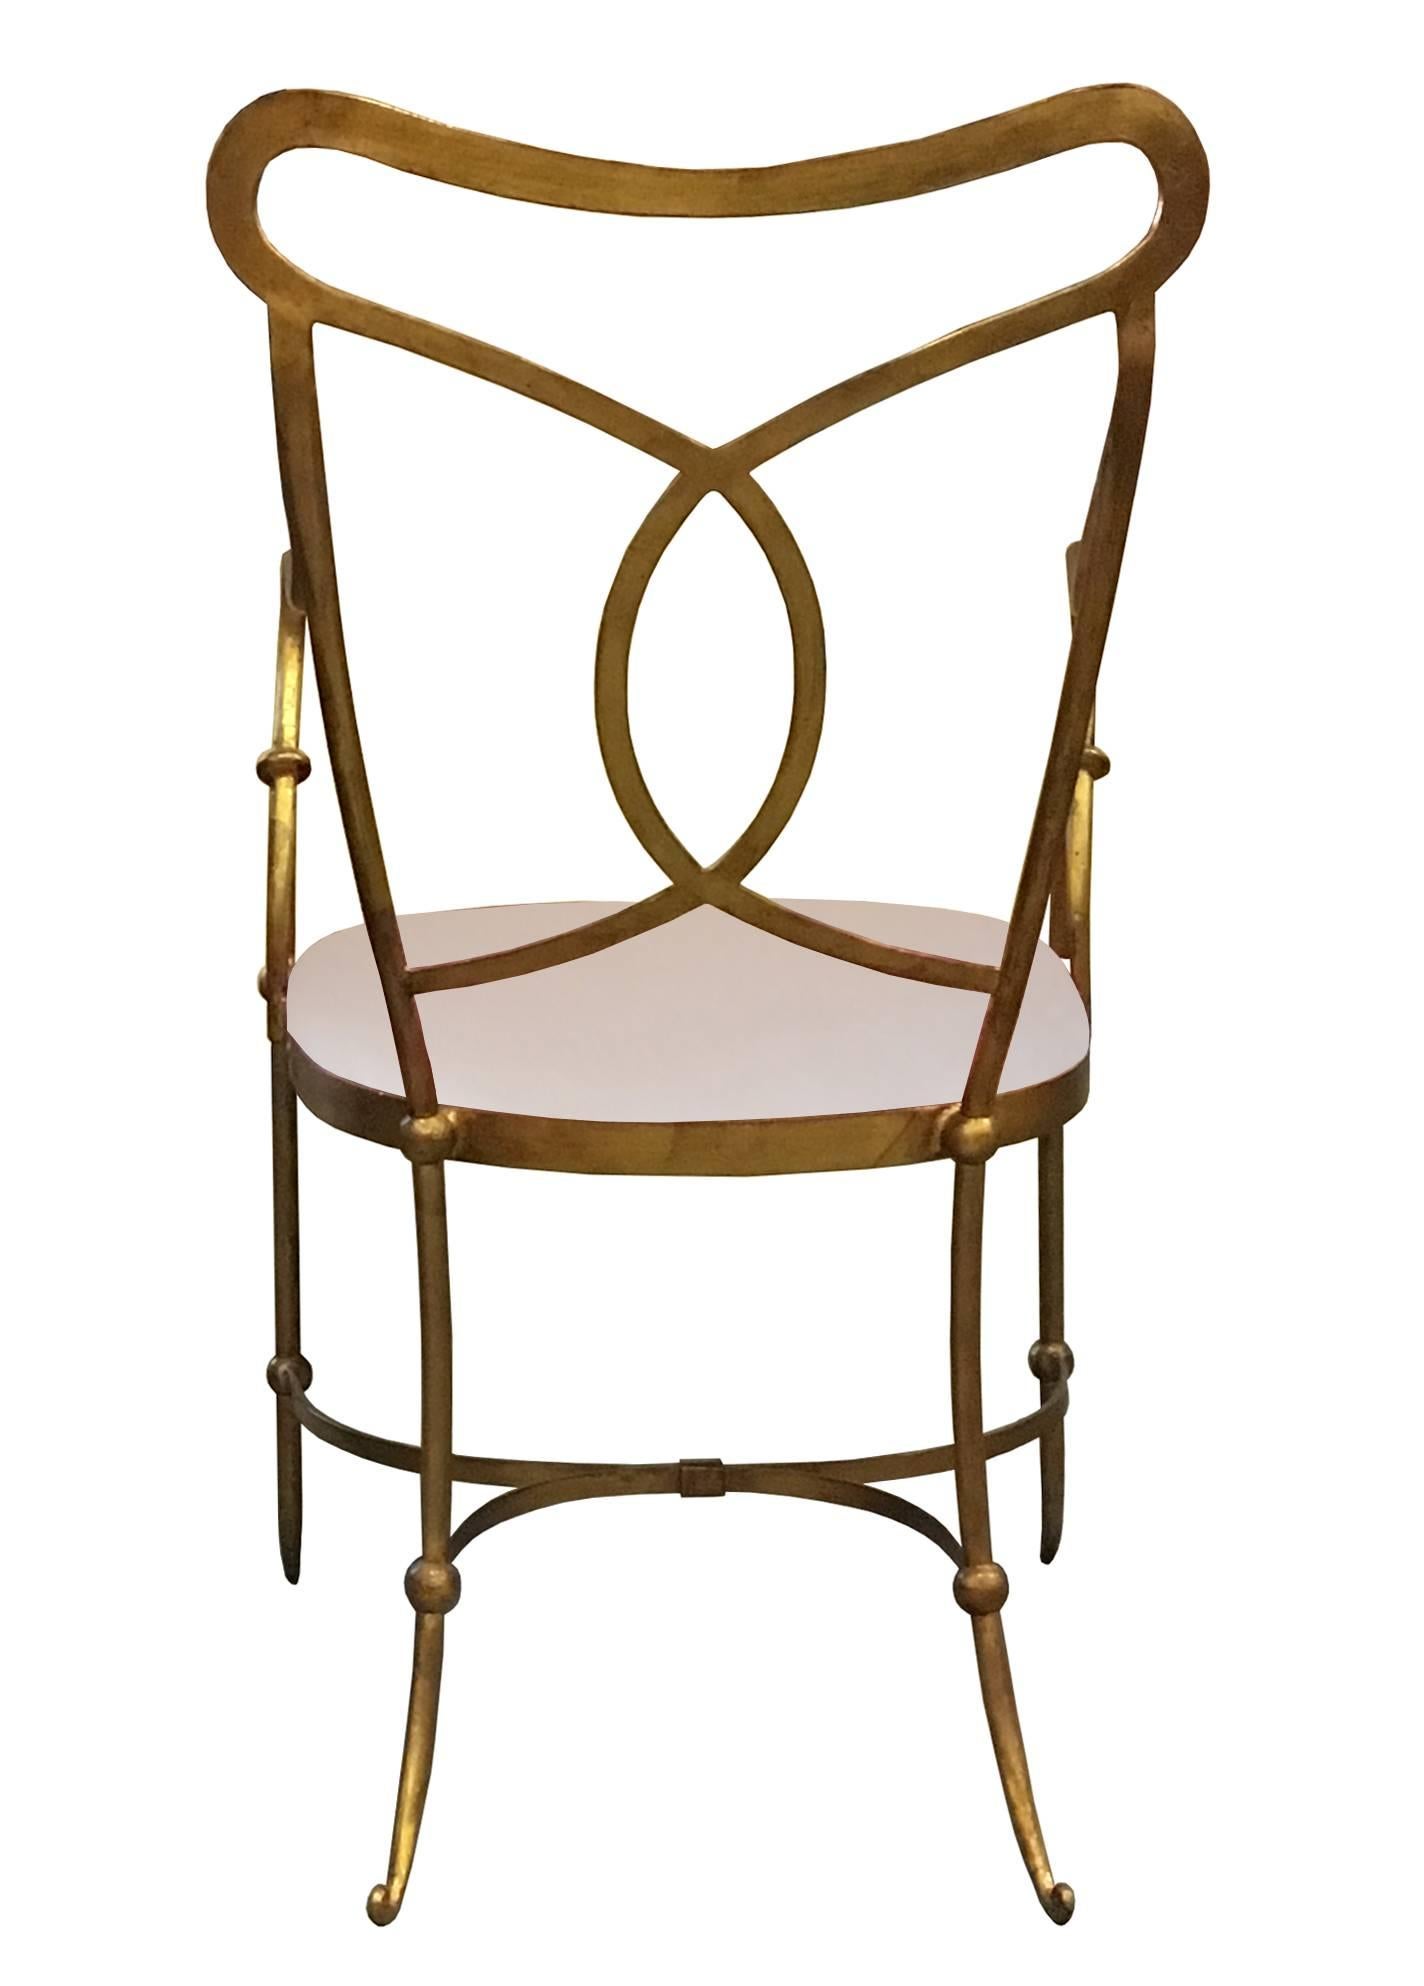 A set of decorative solid hand forged wrought iron dining chairs with gilt finish, French, 1960s.